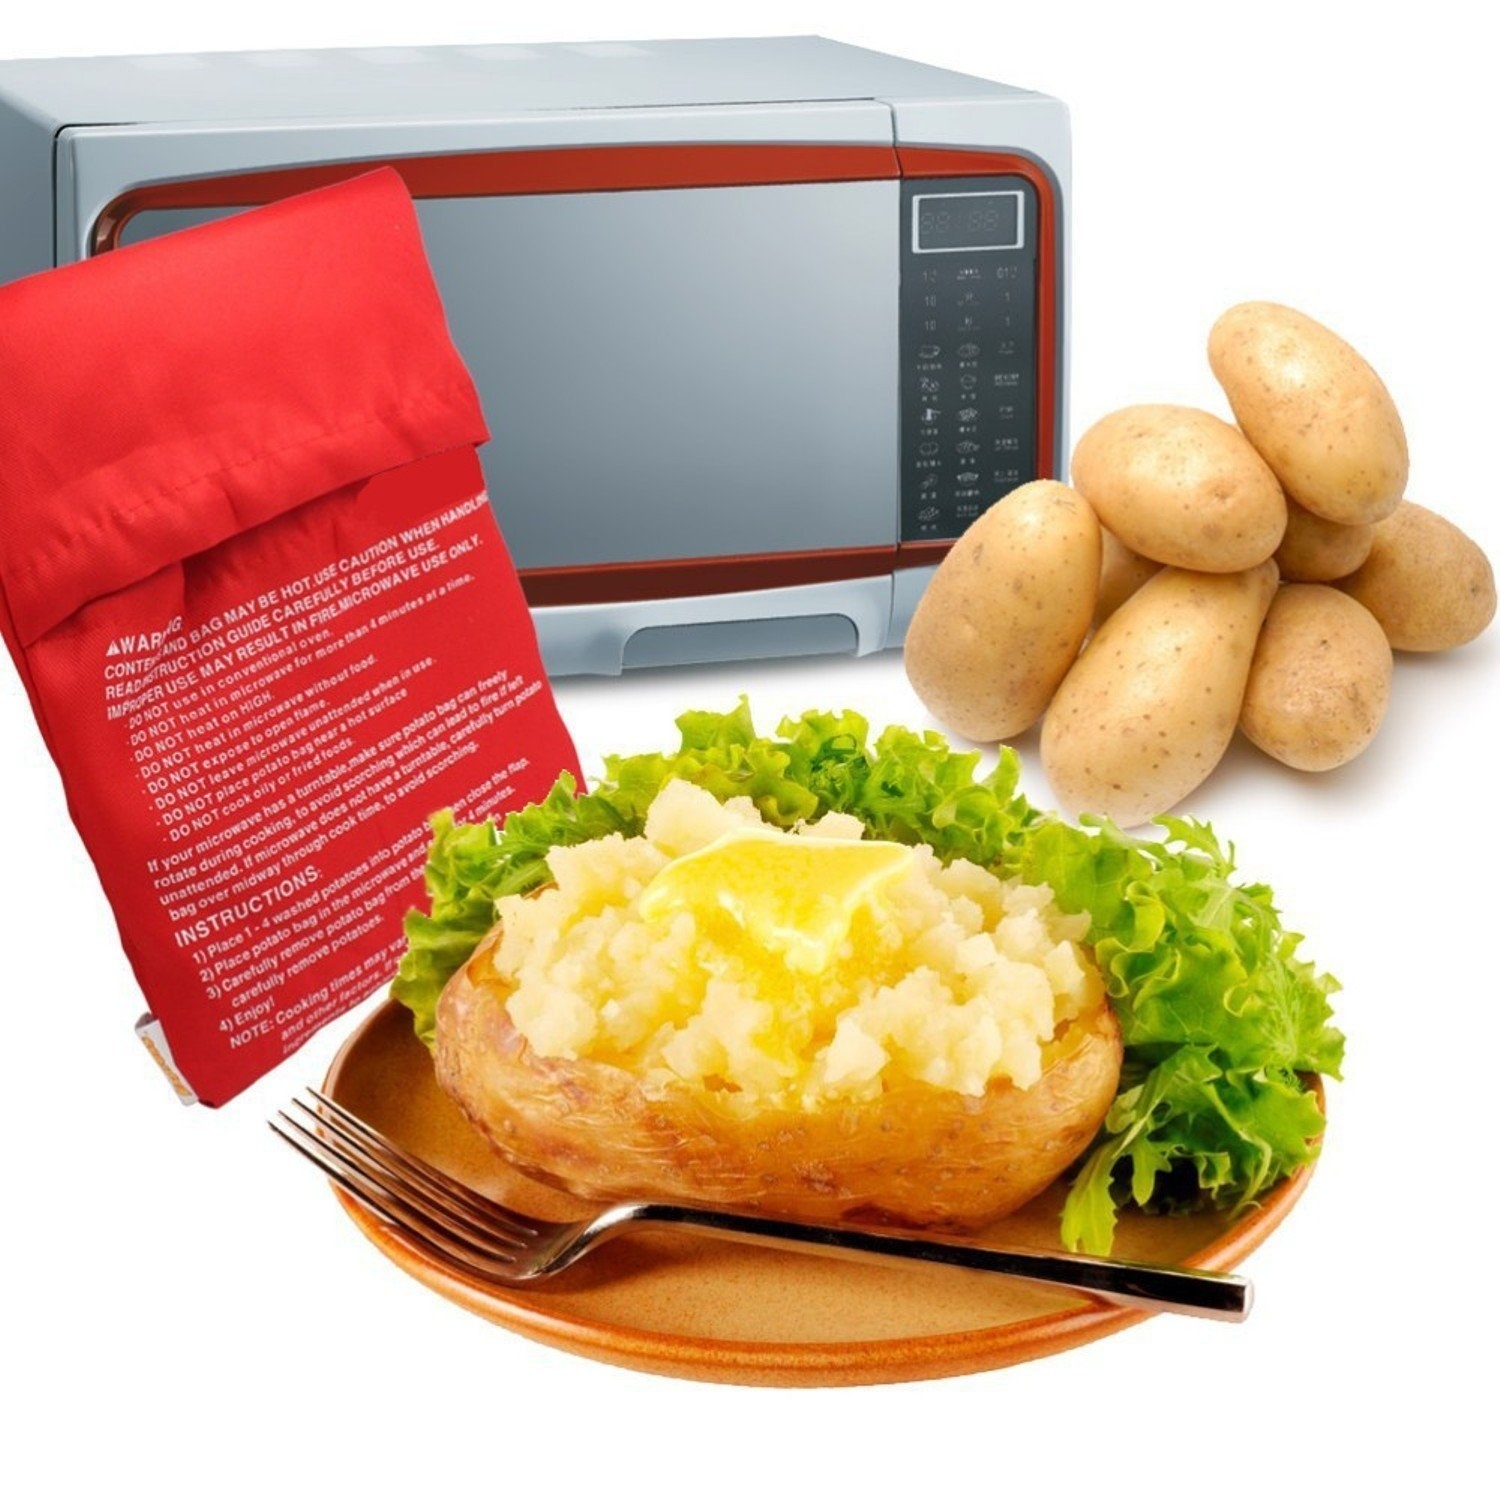 Microwave Accessories, Accessories, Cooking